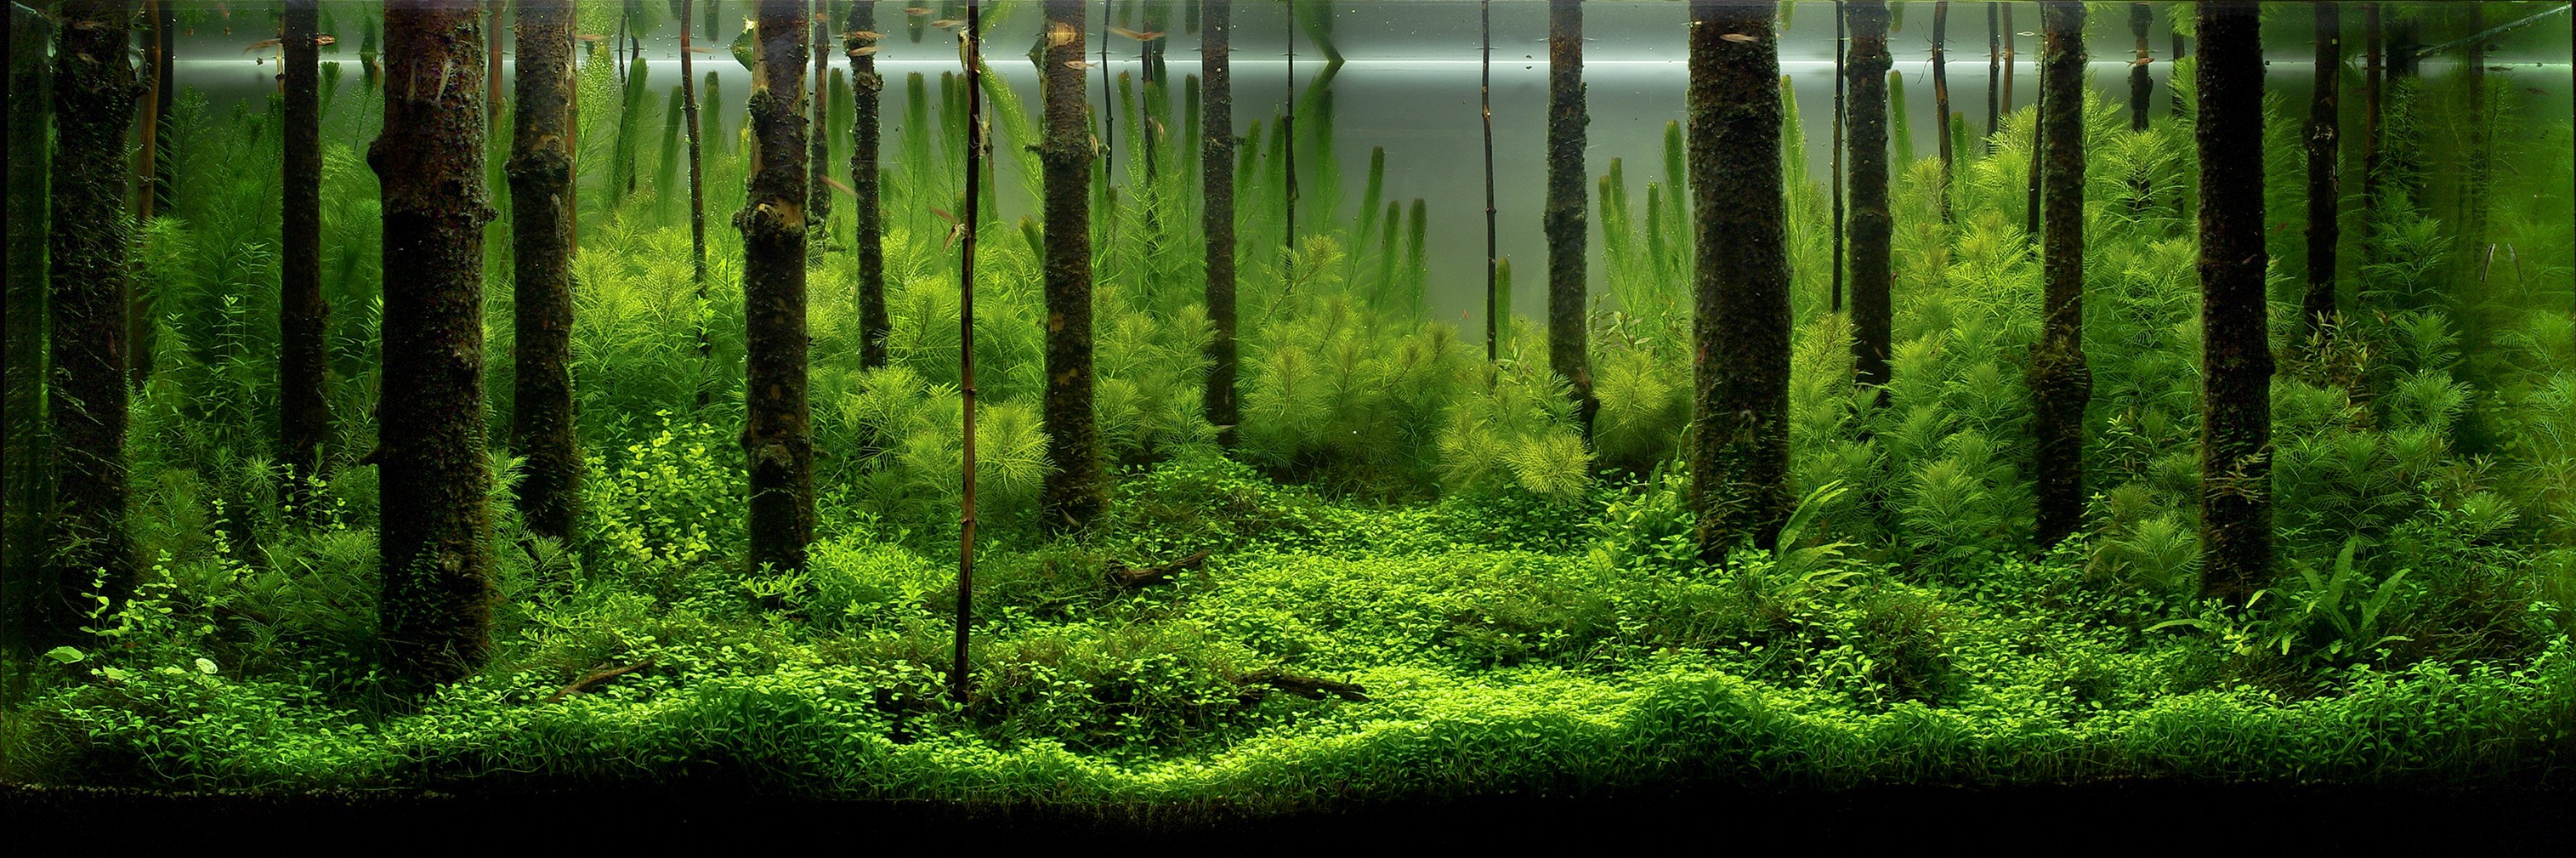 'Forest Scent' aquascape by Pavel Bautin